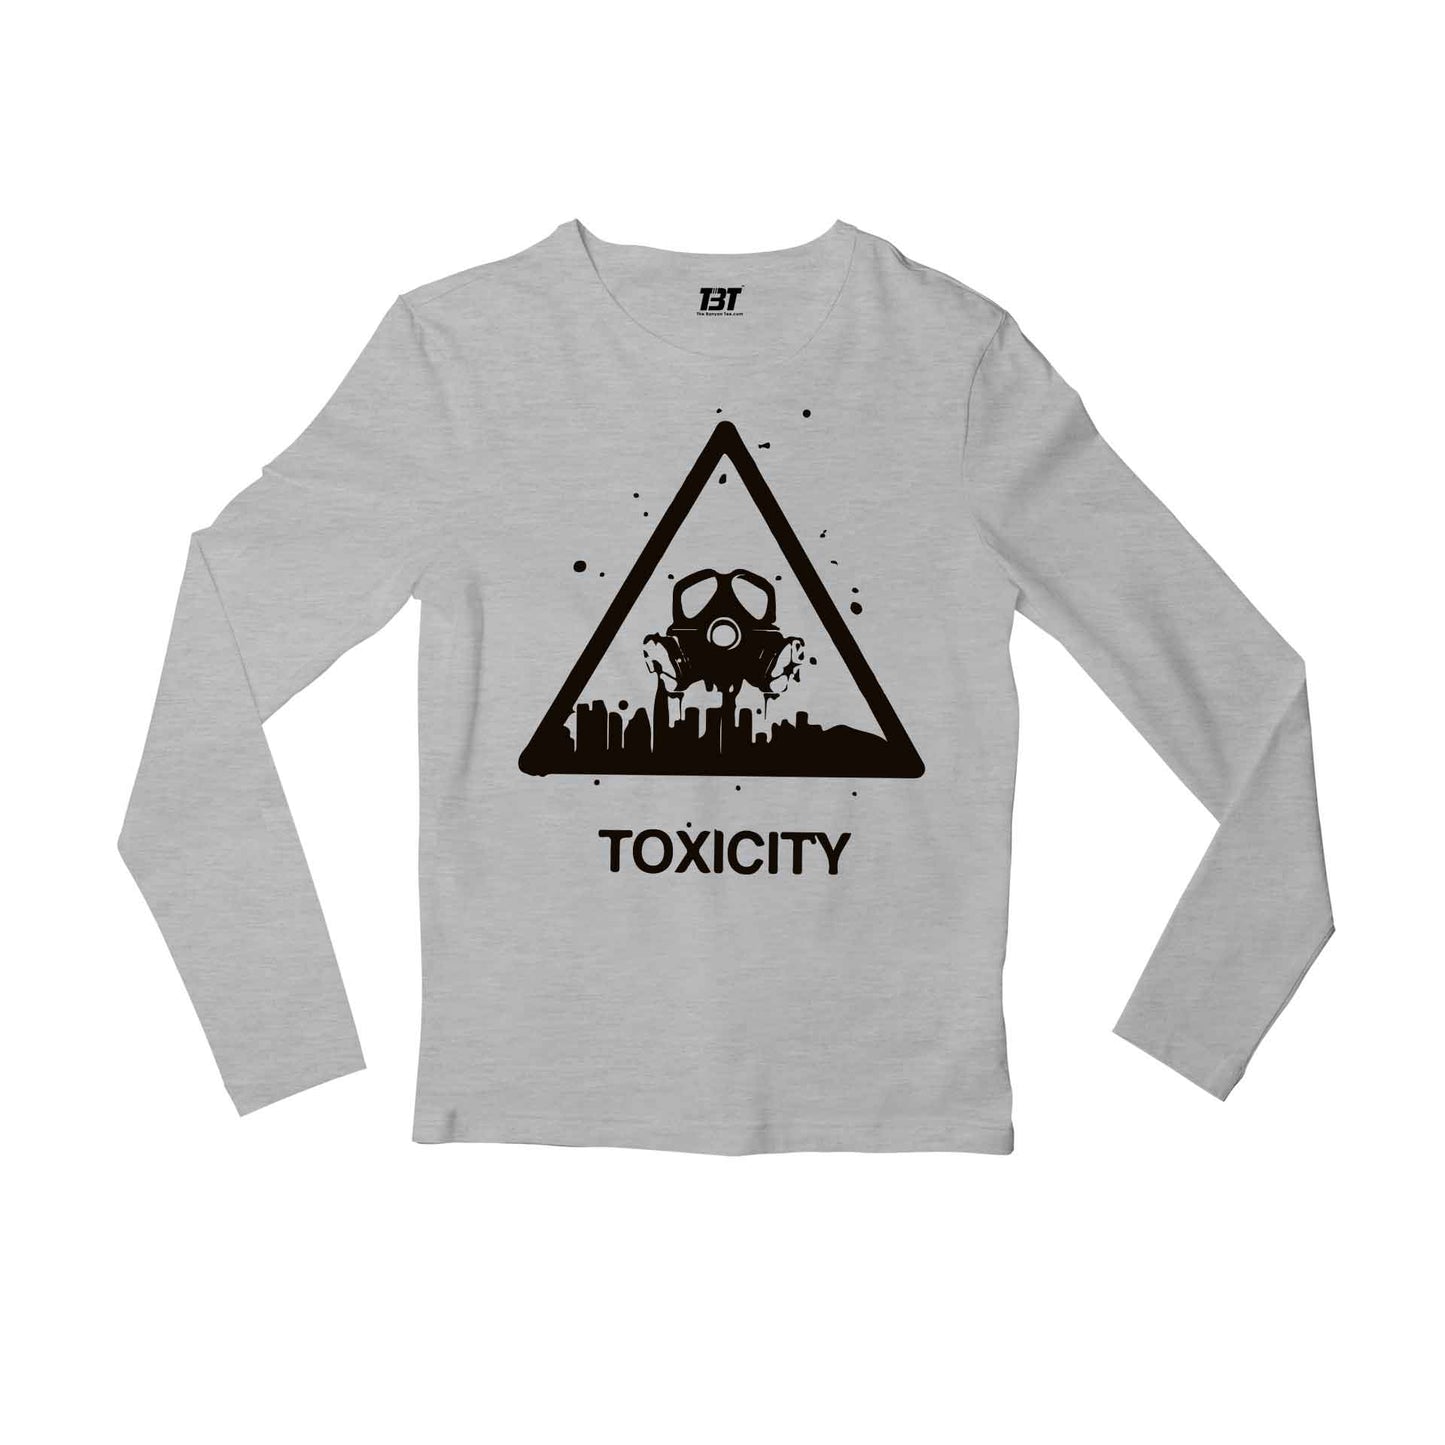 system of a down toxicity full sleeves long sleeves music band buy online india the banyan tee tbt men women girls boys unisex gray